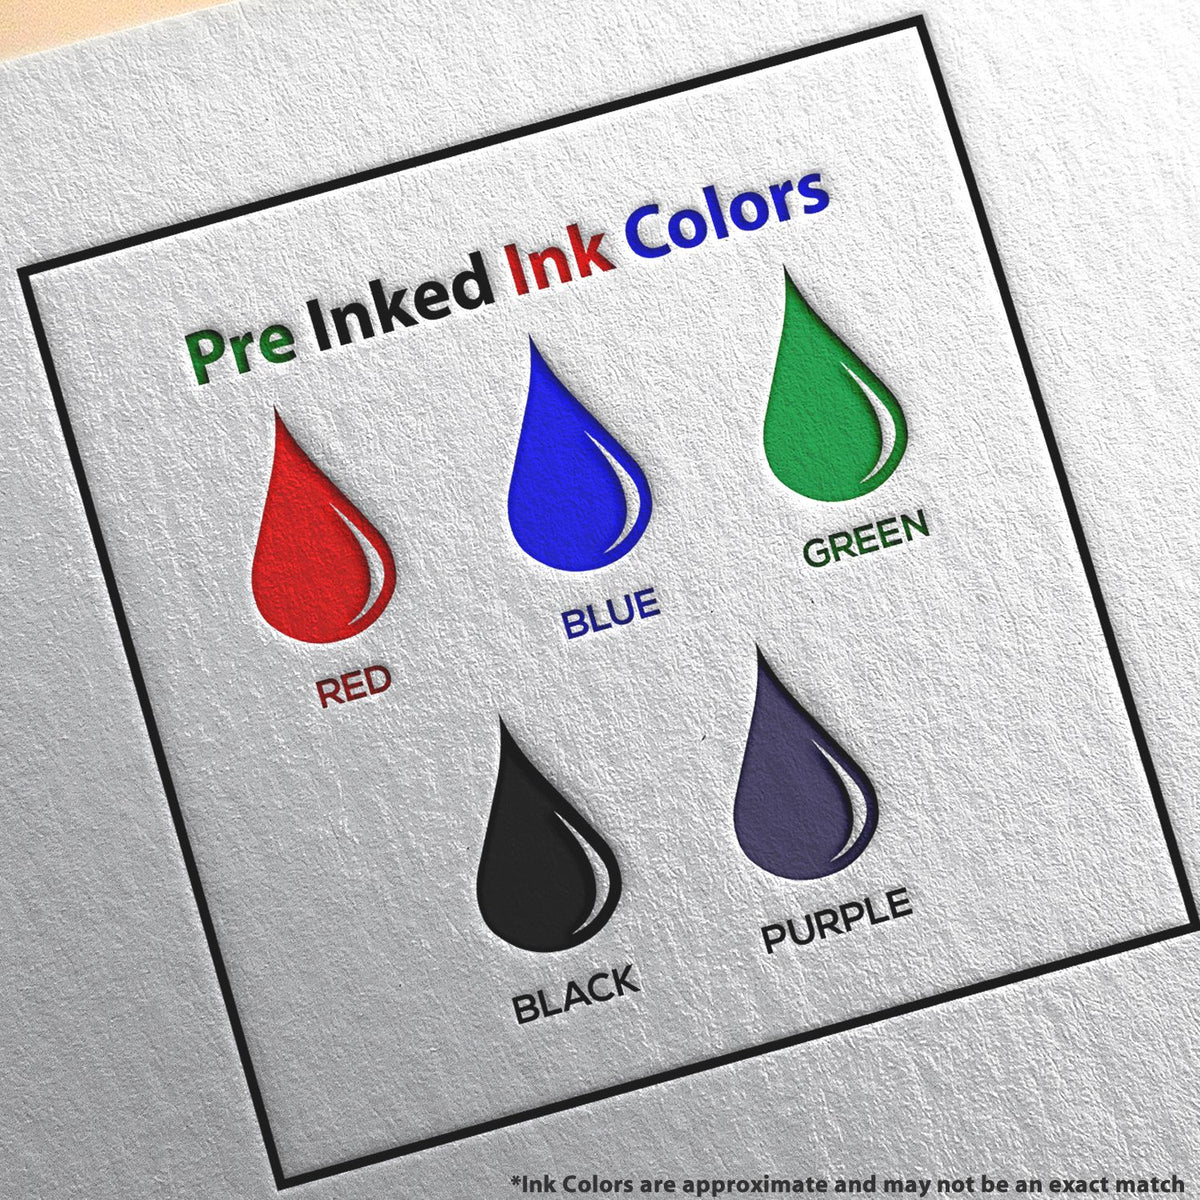 A picture showing the different ink colors or hues available for the Slim Pre-Inked Hawaii Land Surveyor Seal Stamp product.